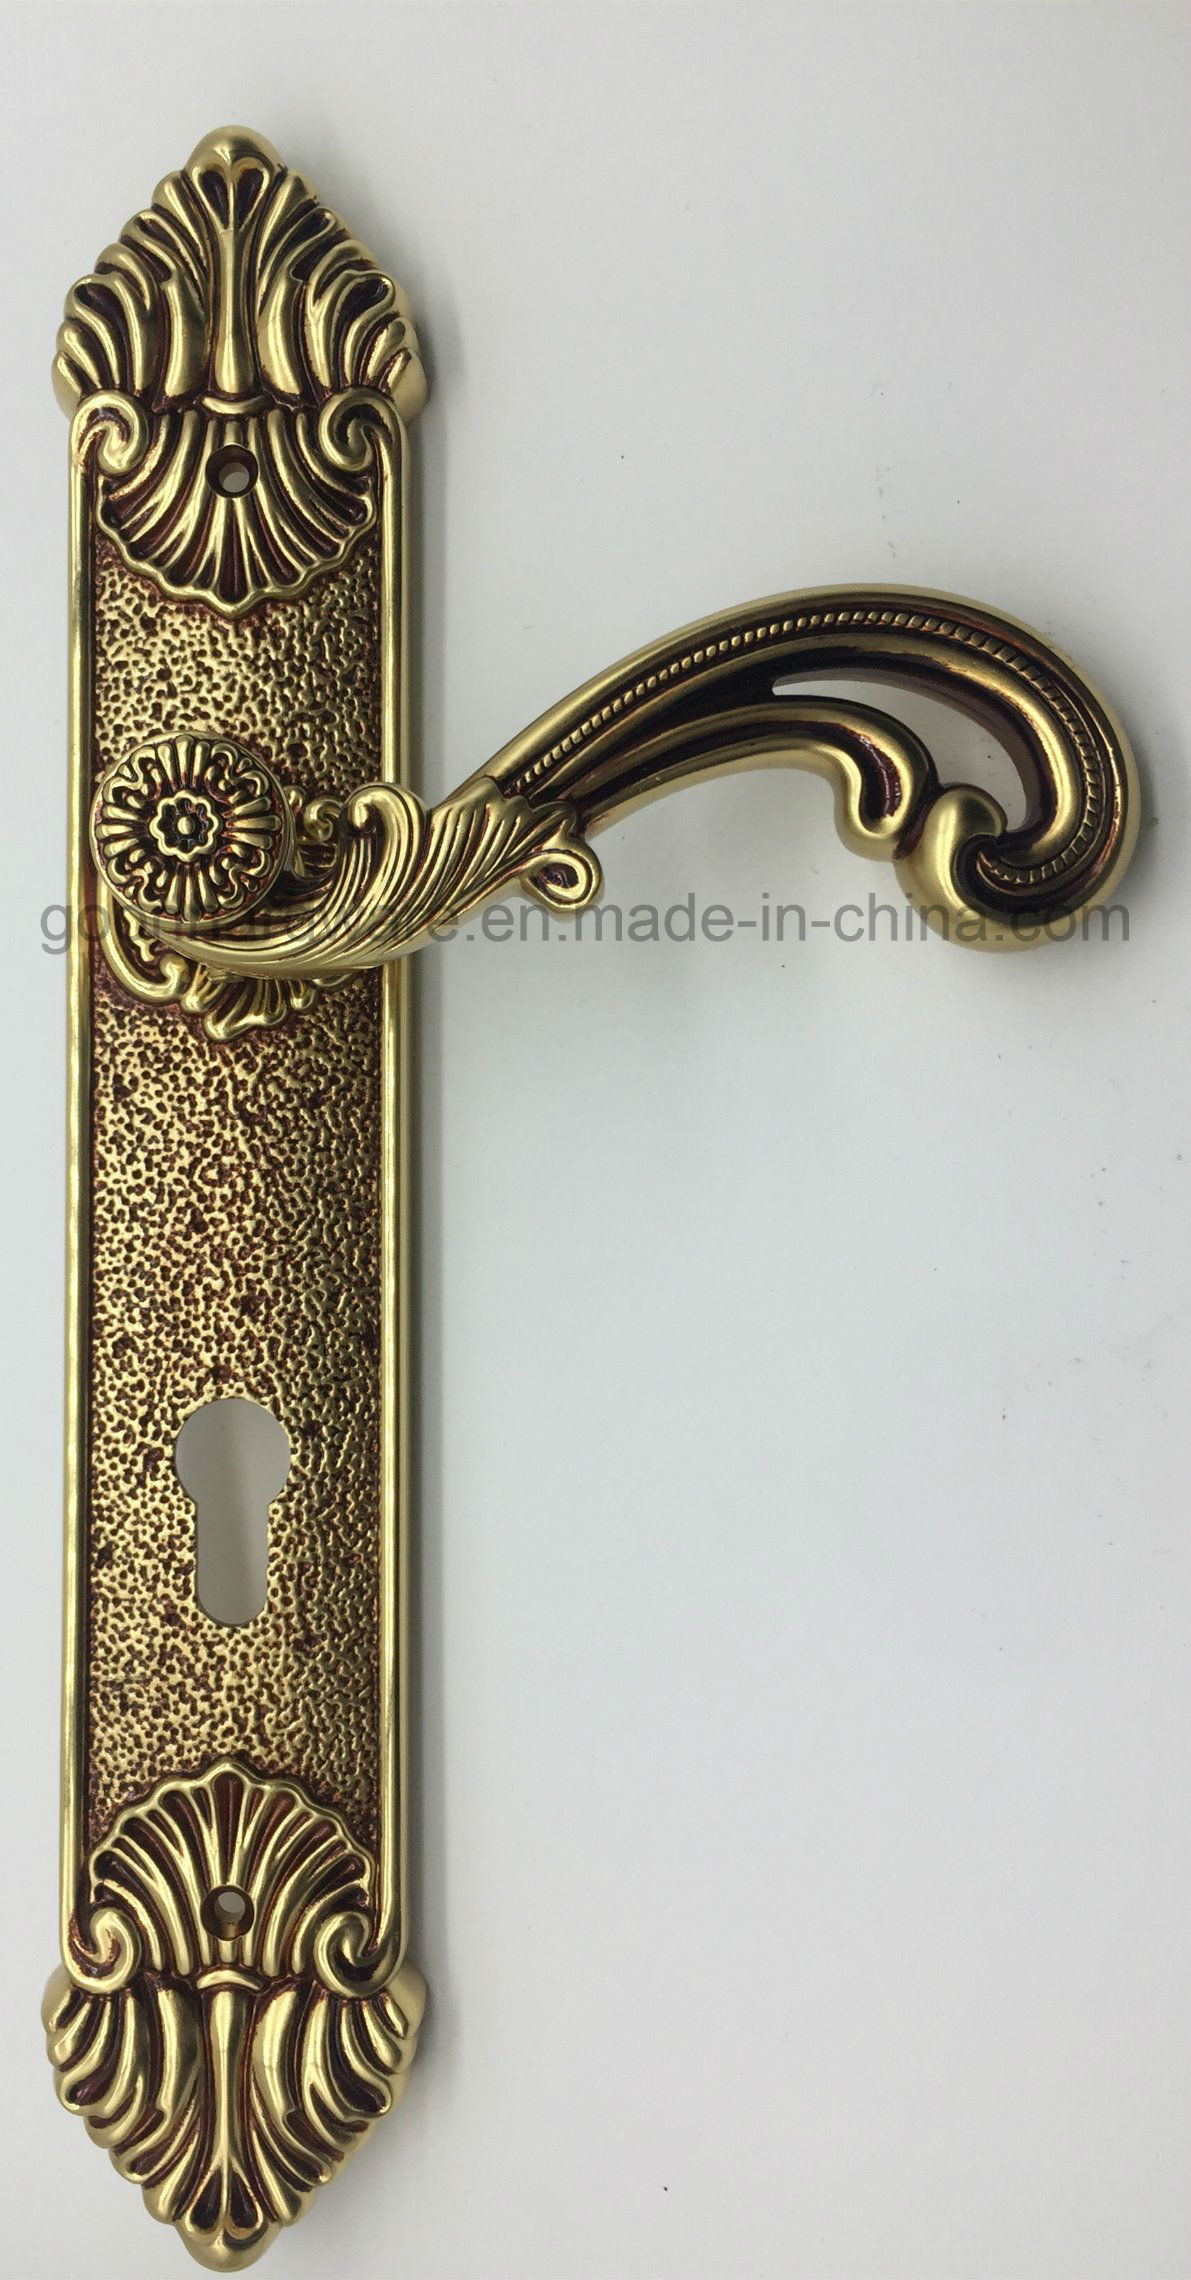 High Quality Solid Brass Door Handle on Plate - 801